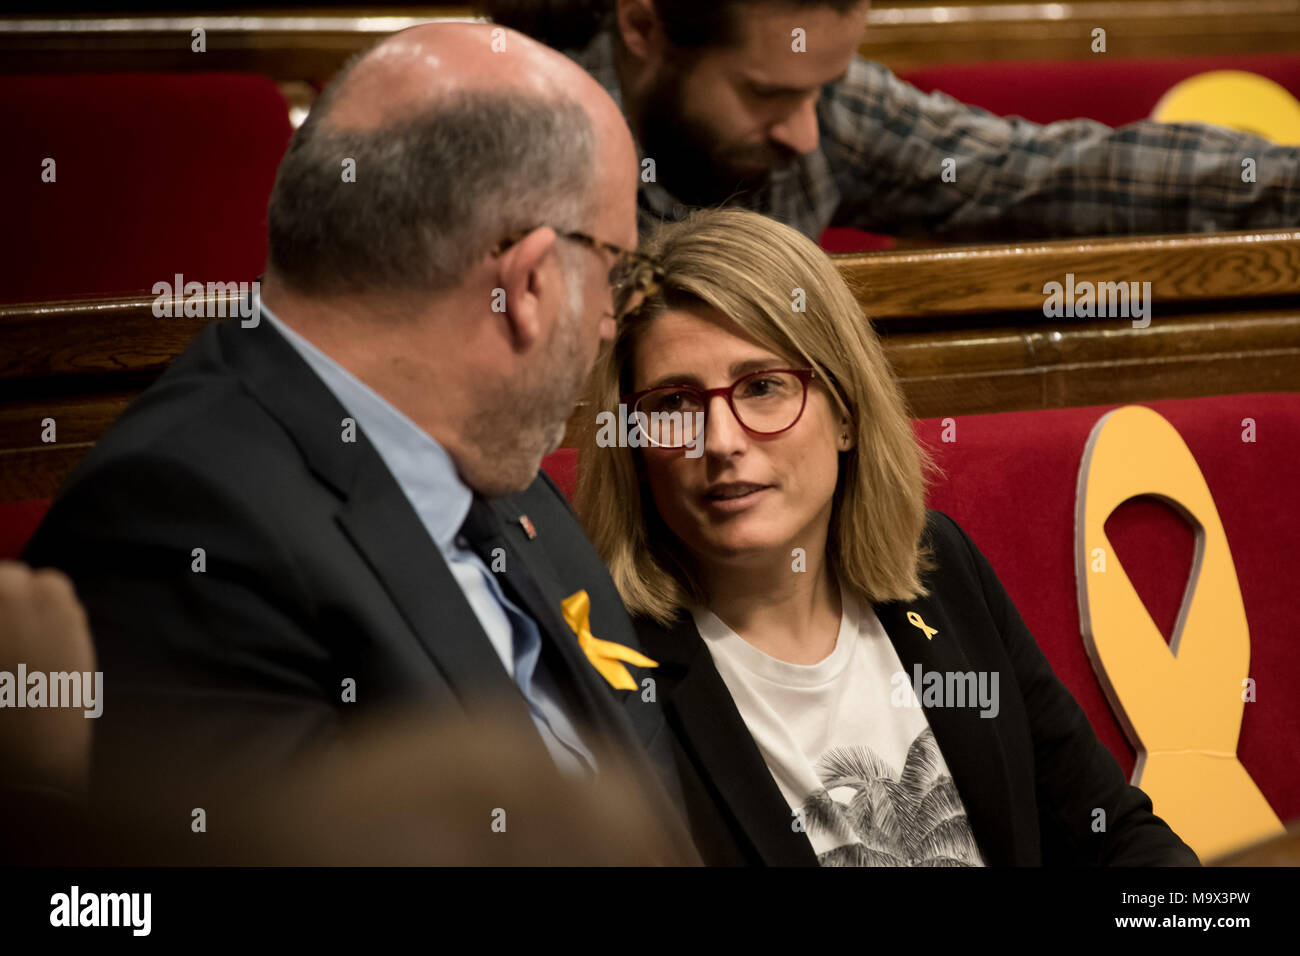 Barcelona, Catalonia, SpainMarch 28, 2018 - Barcelona, Catalonia, Spain -  Junts per Catalunya (JxCAT) member of parliament Eduard Pujol (L) speaks with Elsa Artadi during a parliament session. The independentist parties of the Catalan parliament vindicate the right of Carles Puigdemont to be invested as Catalonia president. Carles Puigdemont is being held by the German authorities after been arrested  on an international warrant. Credit:  Jordi Boixareu/Alamy Live News Stock Photo